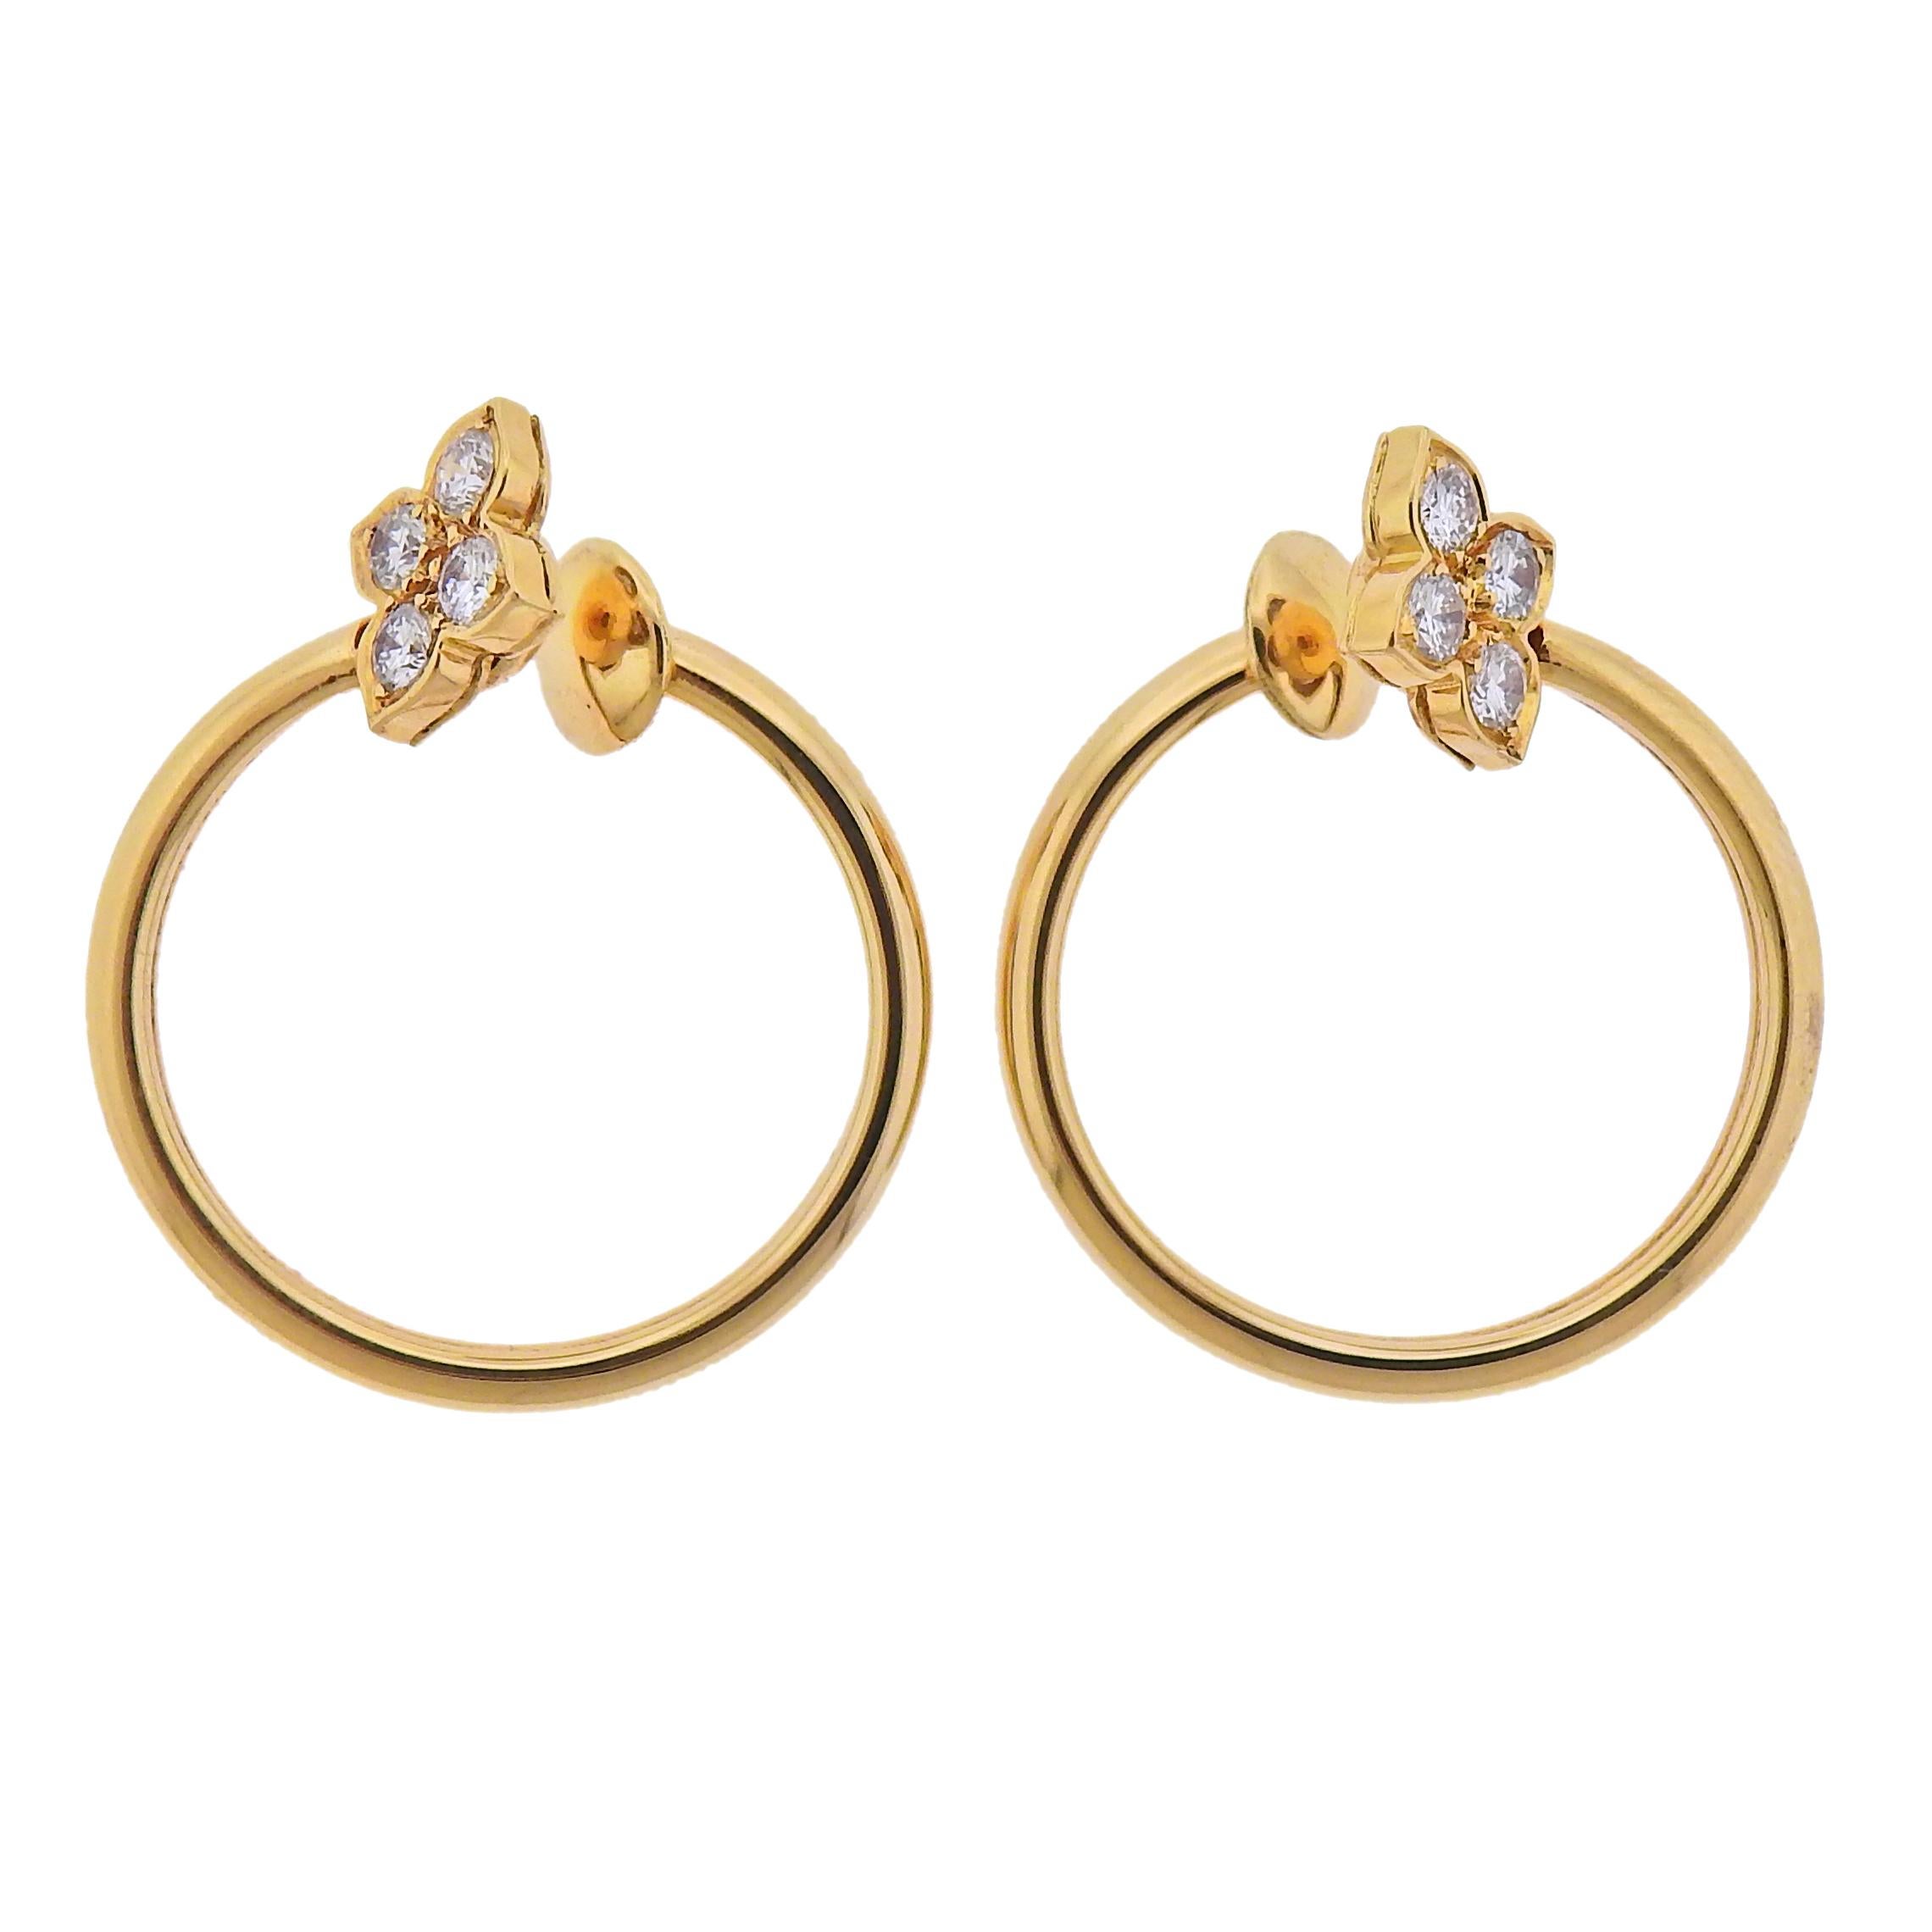 Pair of 18k gold open circle earrings by Cartier, with approx. 0.64ctw in G/VS diamonds. Earrings are 25mm in diameter, diamond flower element - 10mm x 9mm.  Marked: 286879, 750, French mark, Cartier.  Weight - 9 grams. 